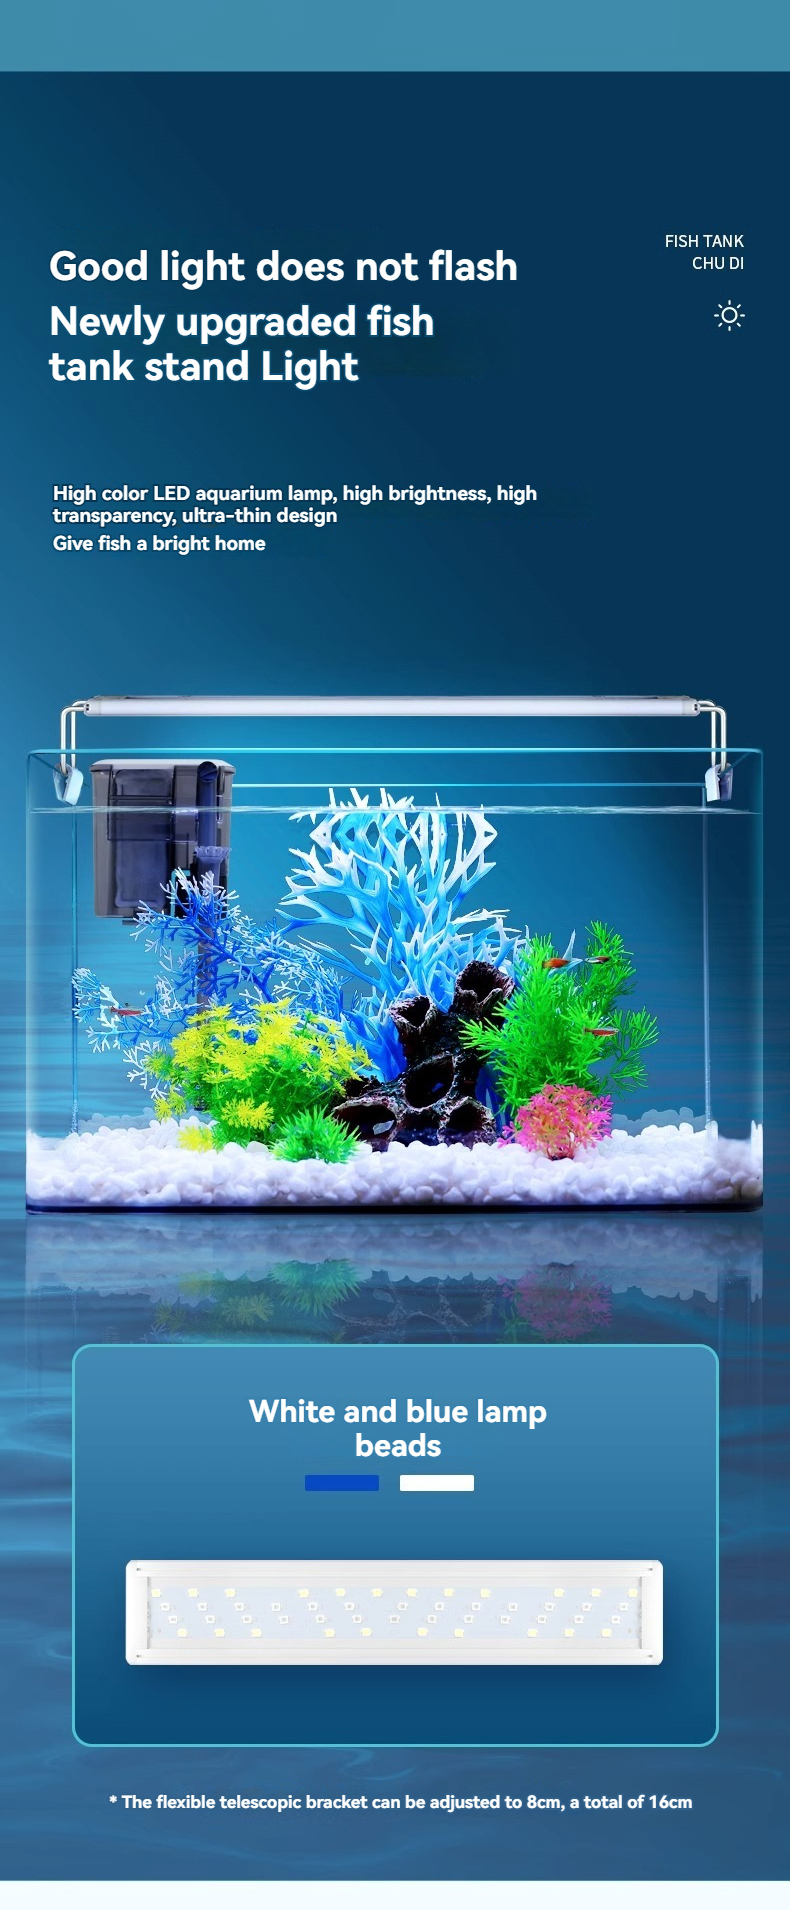 Multifunctional Ecological Small Goldfish Tank Set with Filtration and Oxygenation for Home Living Room Decor